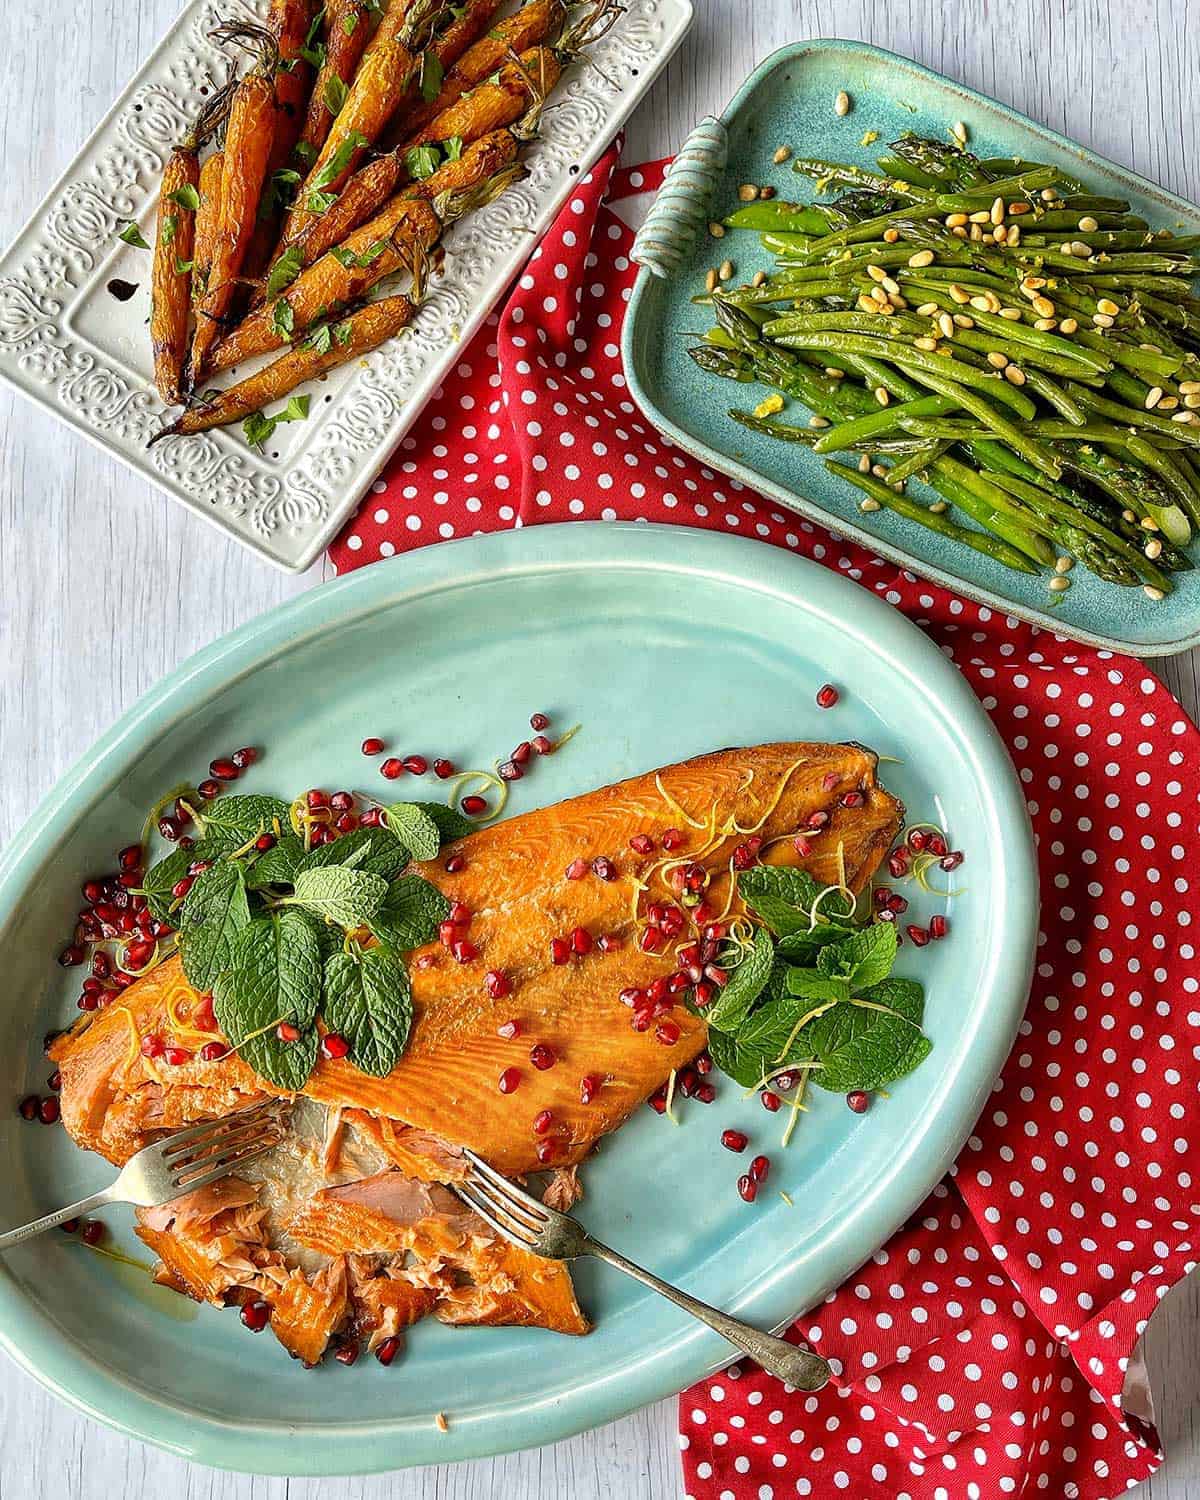 Whole Baked Salmon next to plates of glazed carrots and green beans.